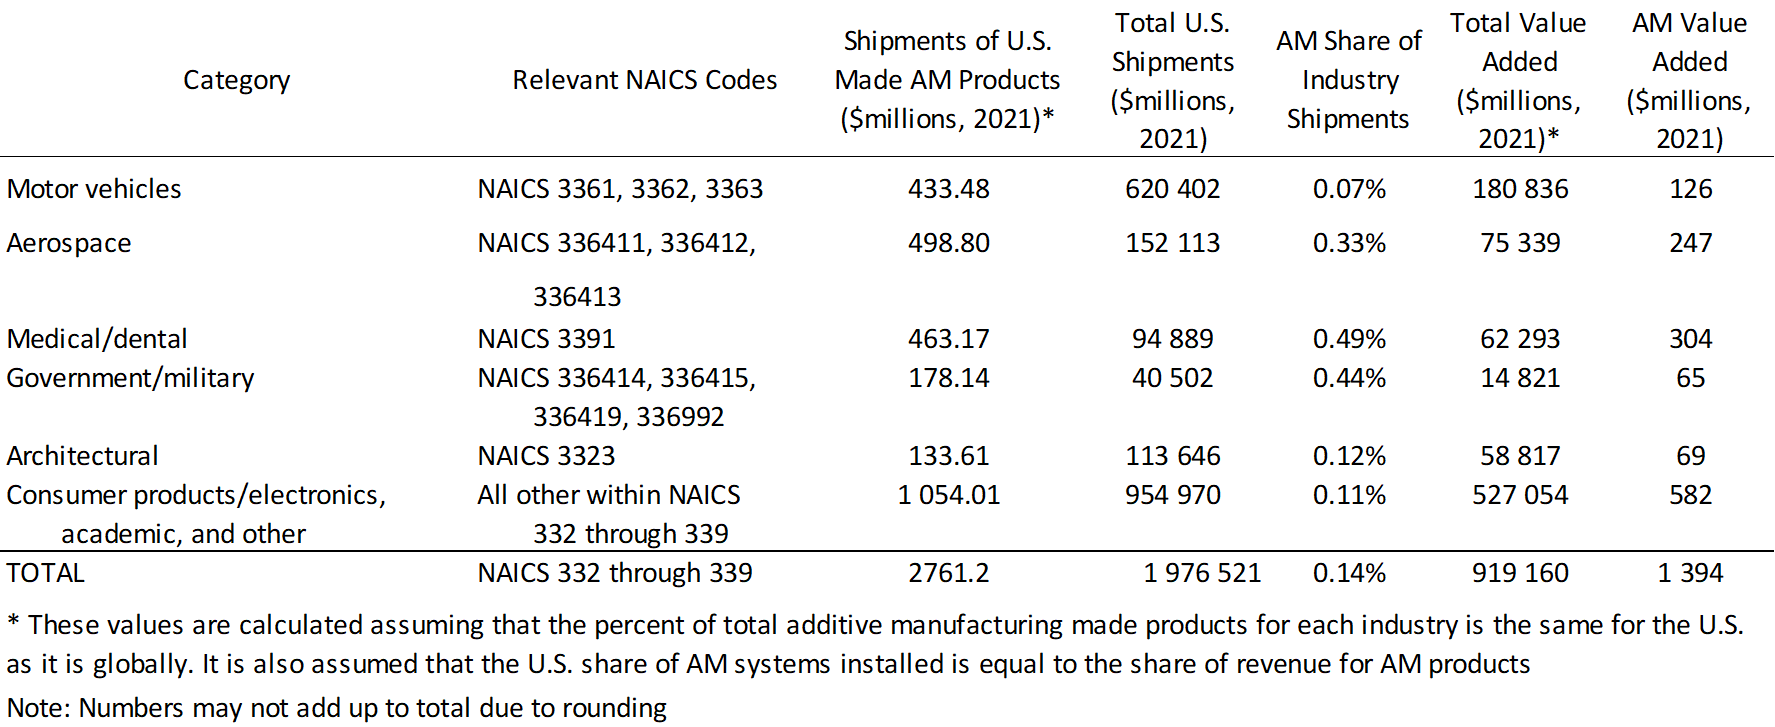 Table B.1 from AMS 600-13: Approximation of U.S. Shipments and Value Added of Goods Produced using Additive Manufacturing